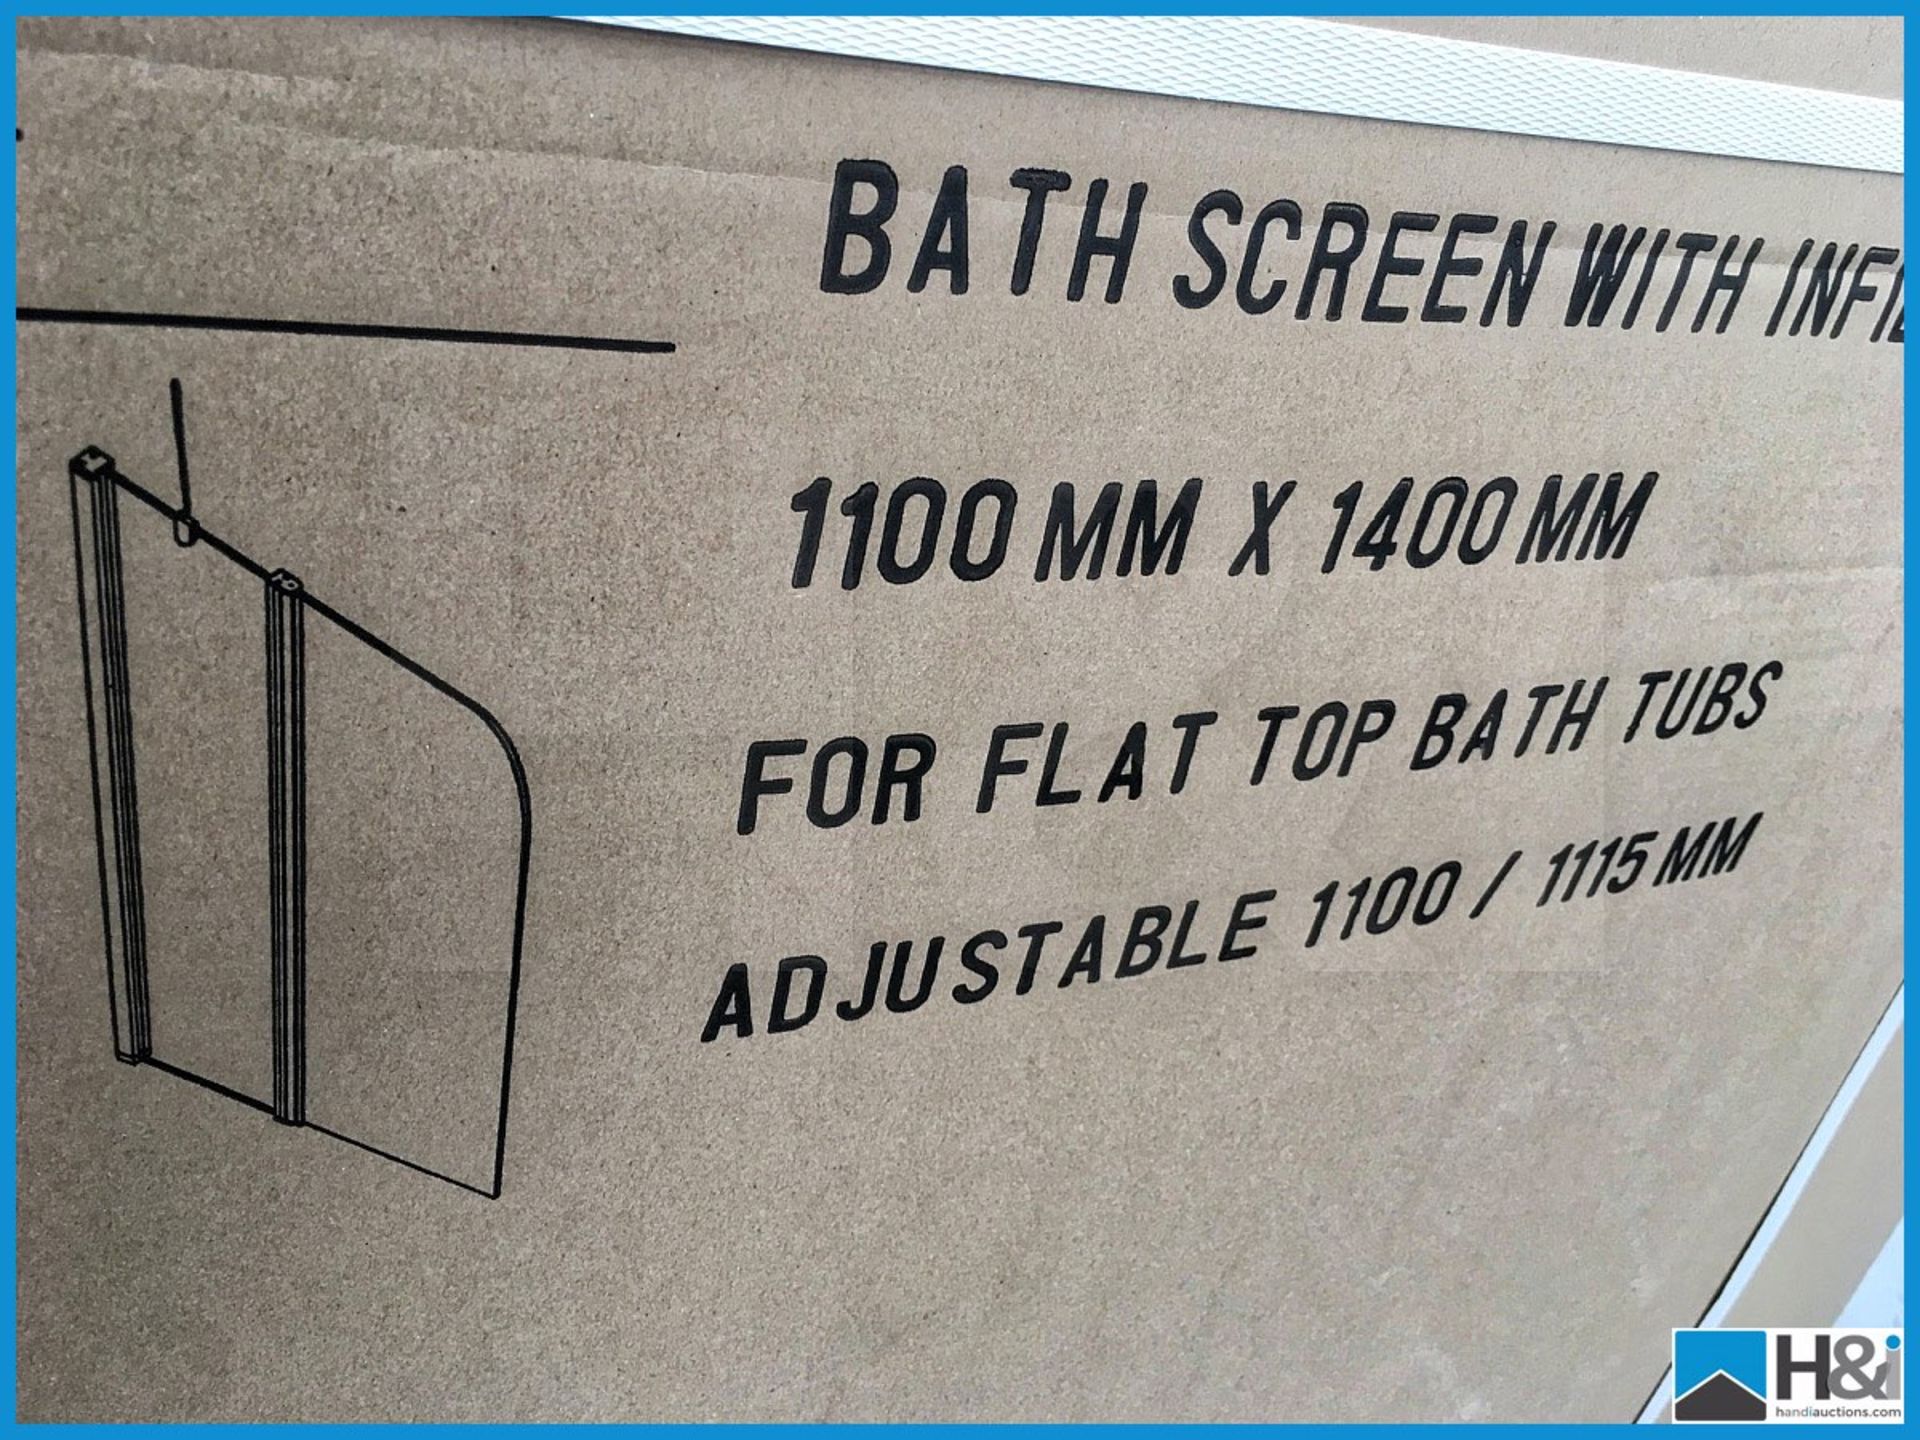 Designer Rainbow bath screen with infill panel 1100x1400. New and boxed. Suggested manufacturers - Image 3 of 3